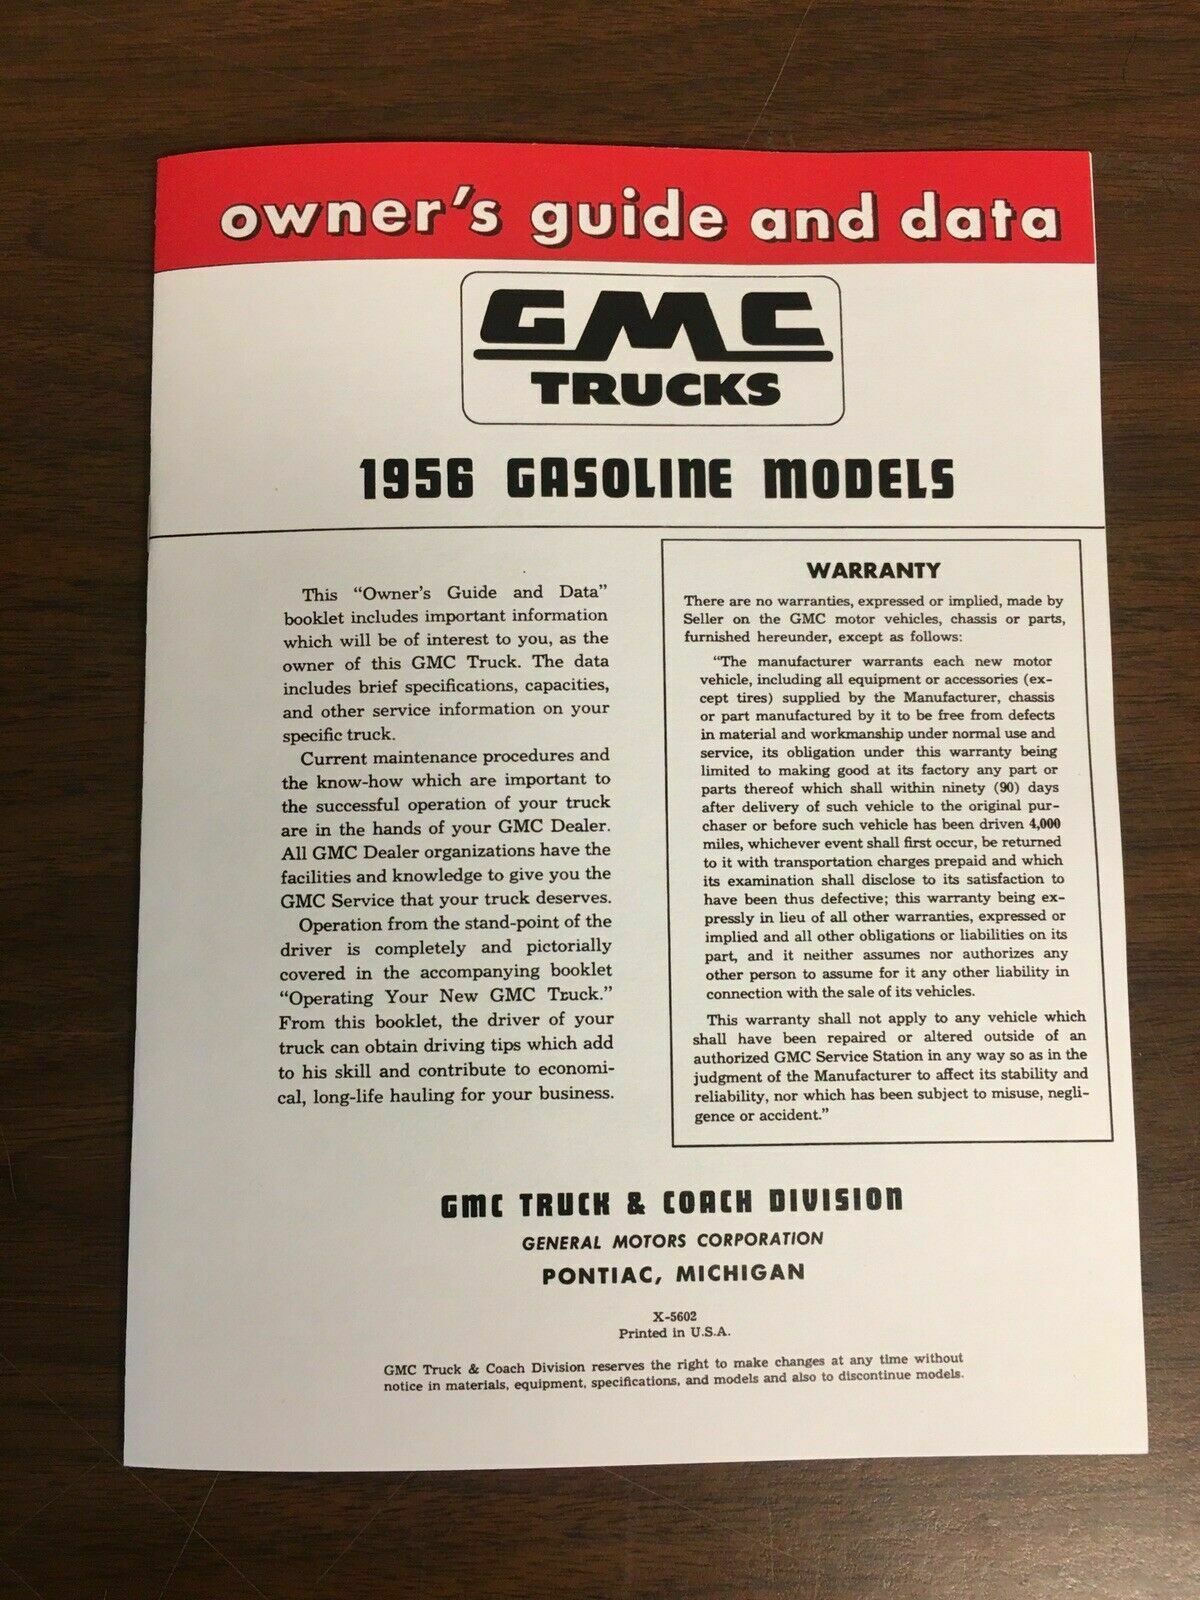 Manuals: 1956 GMC Truck Owner's Guide And Data Manual 13 Page Super Nice And Rare